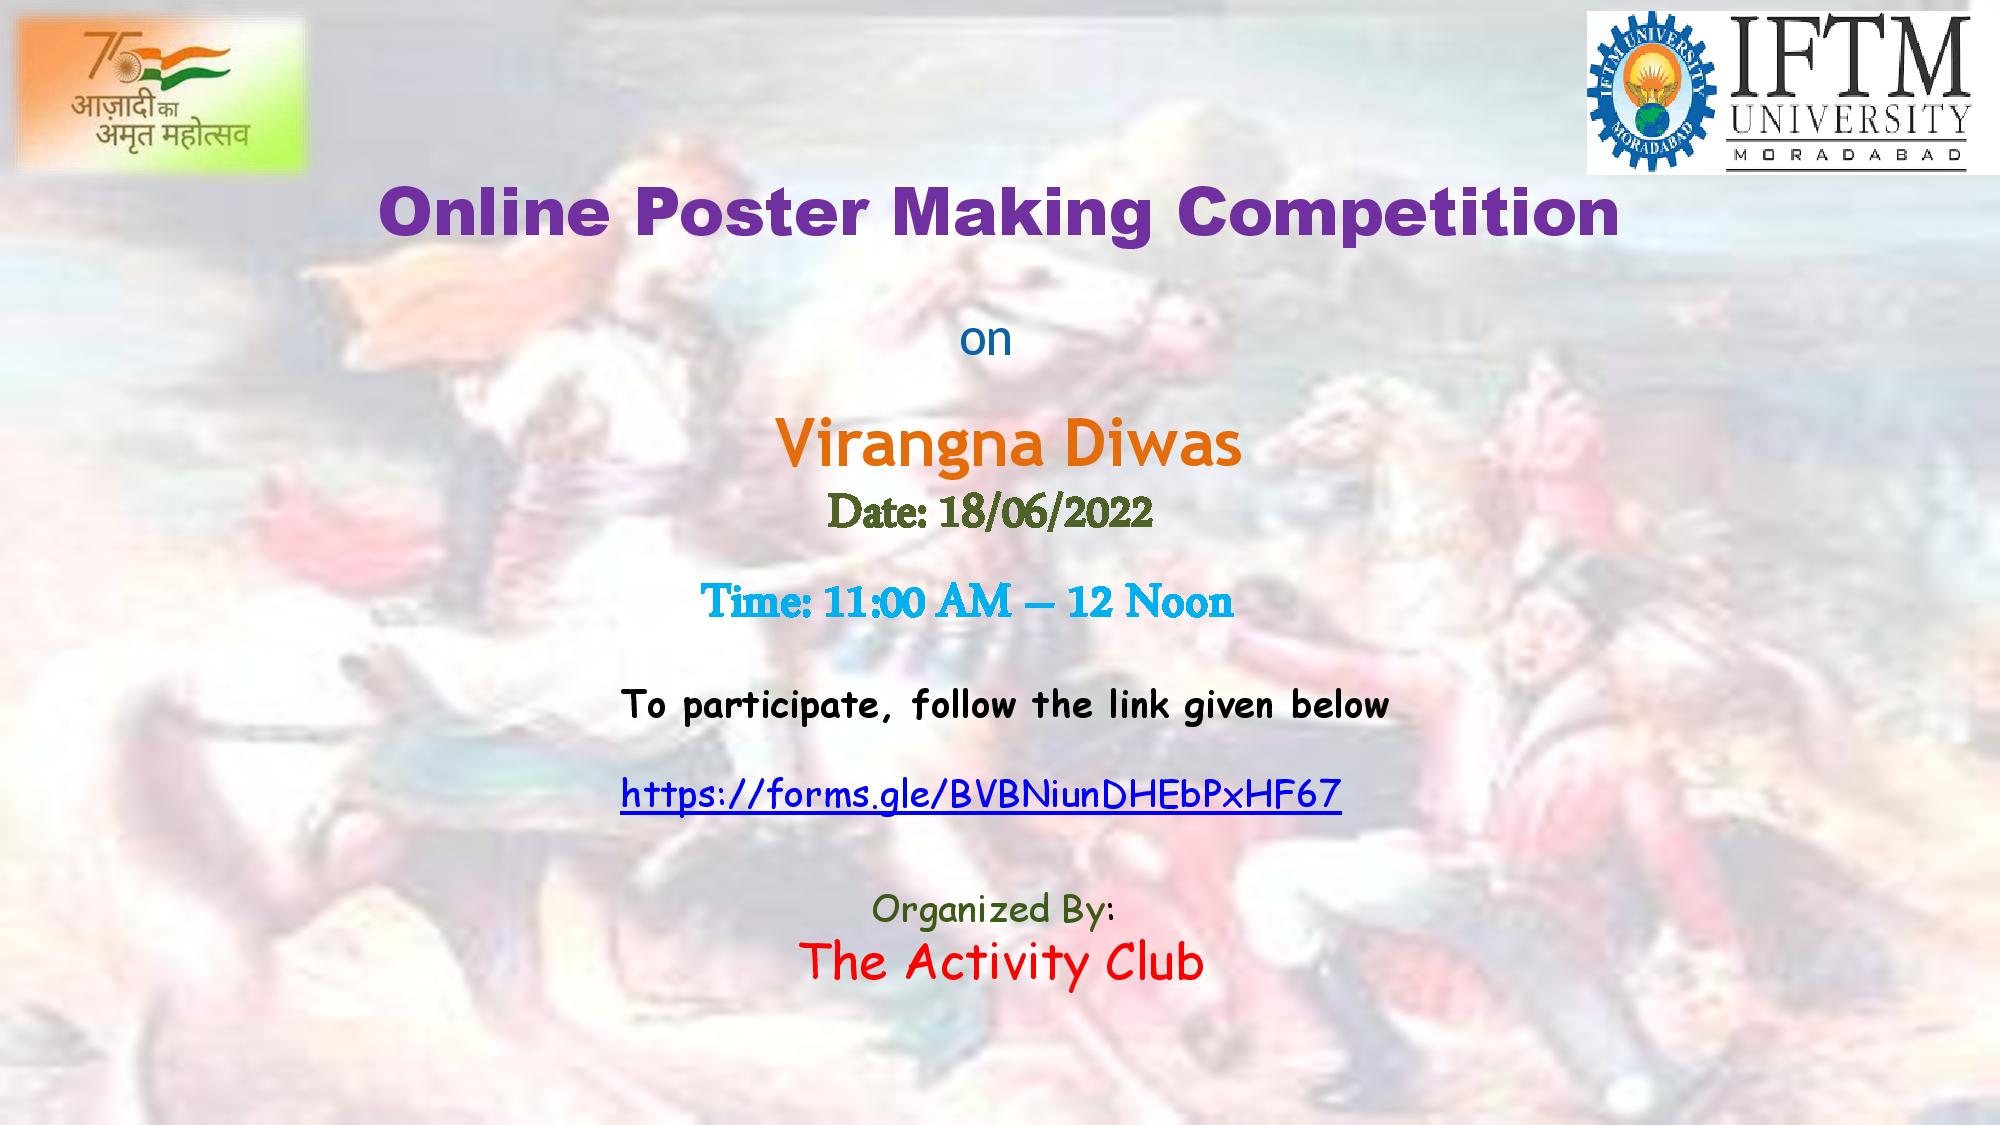 Online Poster Making Competition on Virangna Diwas